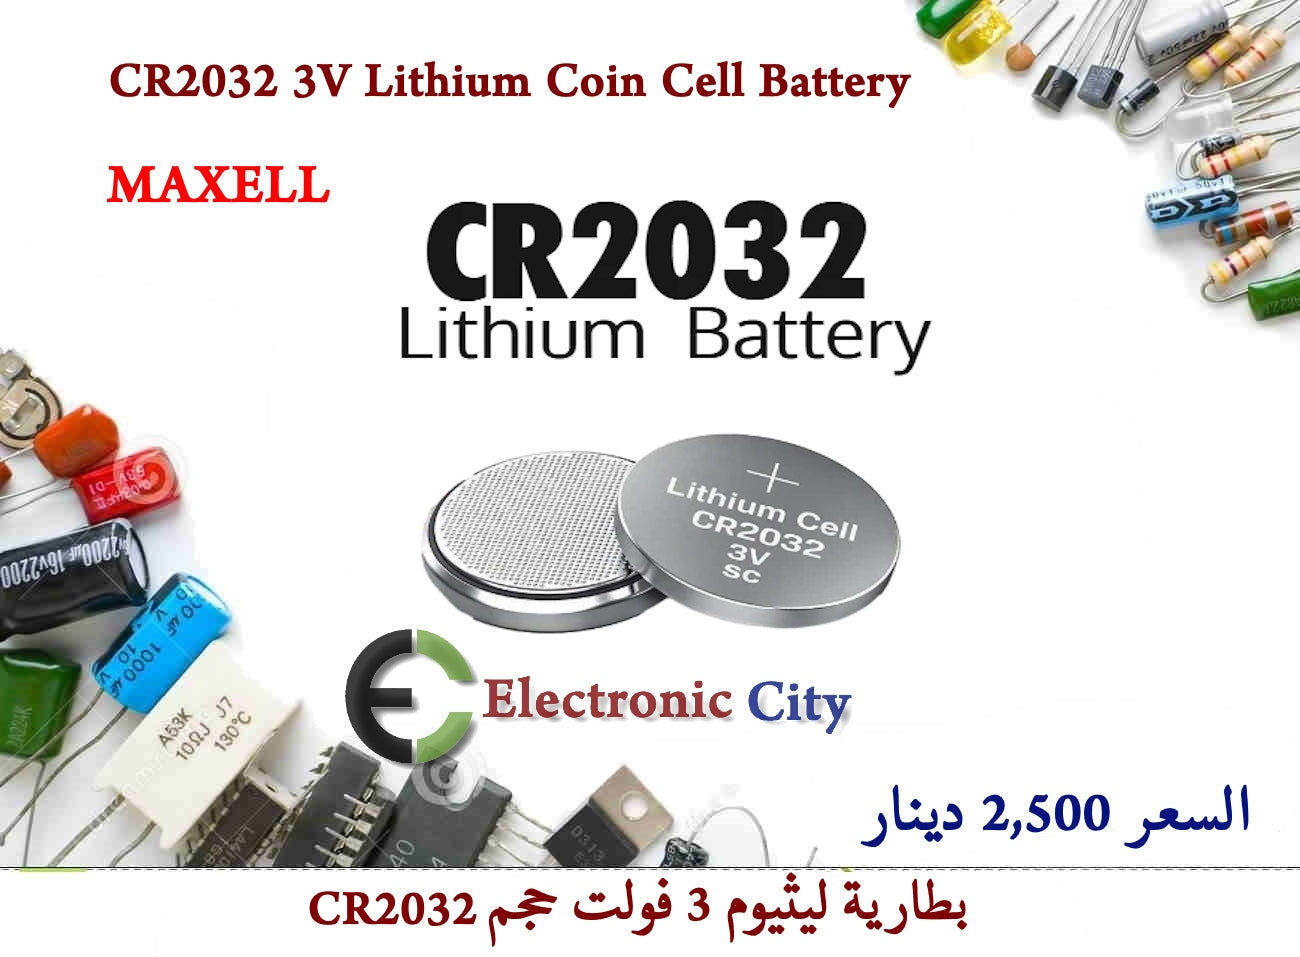 CR2032 3V Lithium Coin Cell Battery  MAXELL